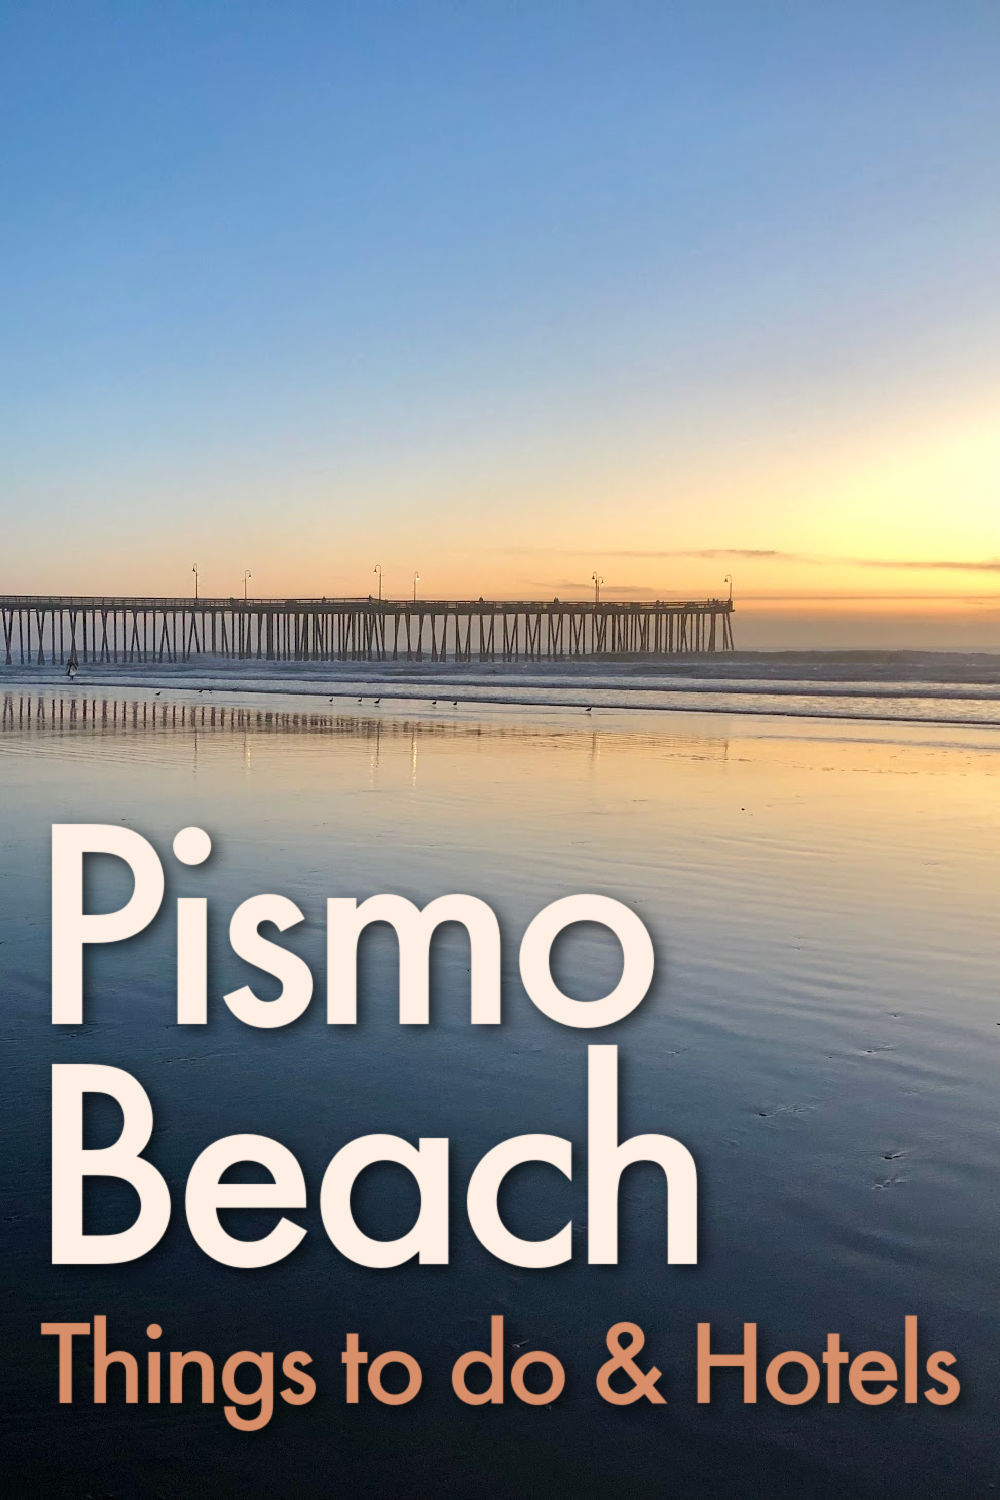 All you need to know to plan your trip to Pismo Beach, California, is here!Things to do in Pismo Beach, activities, attractions, parks, and more. From surfing in Pismo Beach to hiking and relaxing in the hot spring, we covered all the fun activities in this Pismo Guide. Plus, recommendations about where to stay in Pismo Beach, best hotels for all budgets. Pismo Beach Ca | Pismo Beach hotels | Pismo beach attractions | Pismo Beach surf | Pismo Beach Pier | Pismo Beach things to do |  